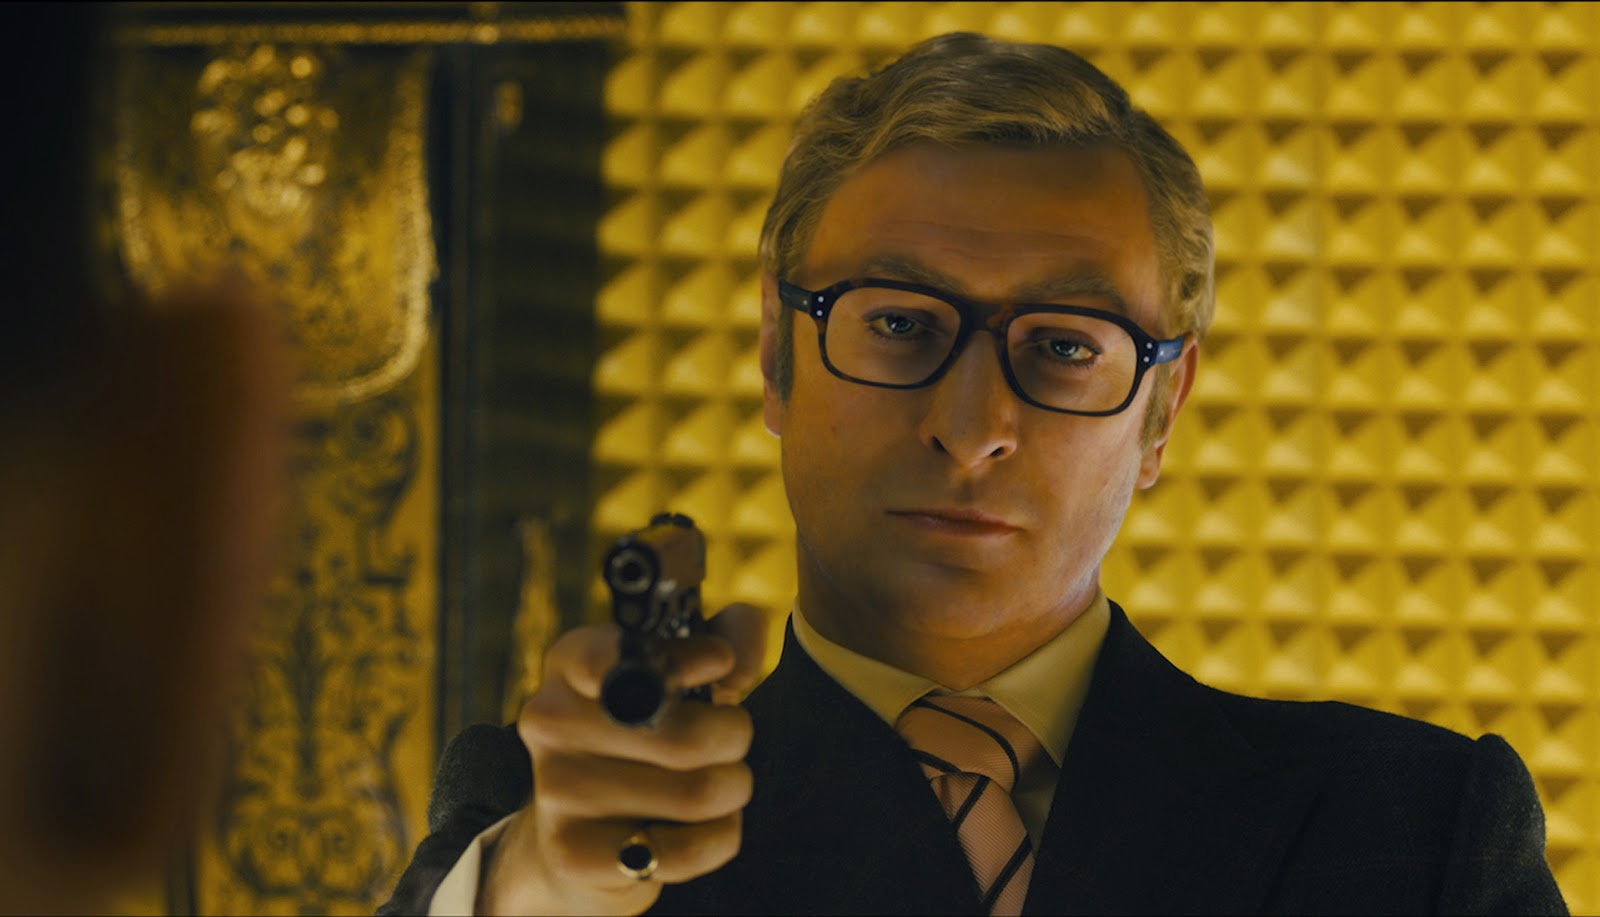 Michael Caine Undergoes Transformation in Kingsman